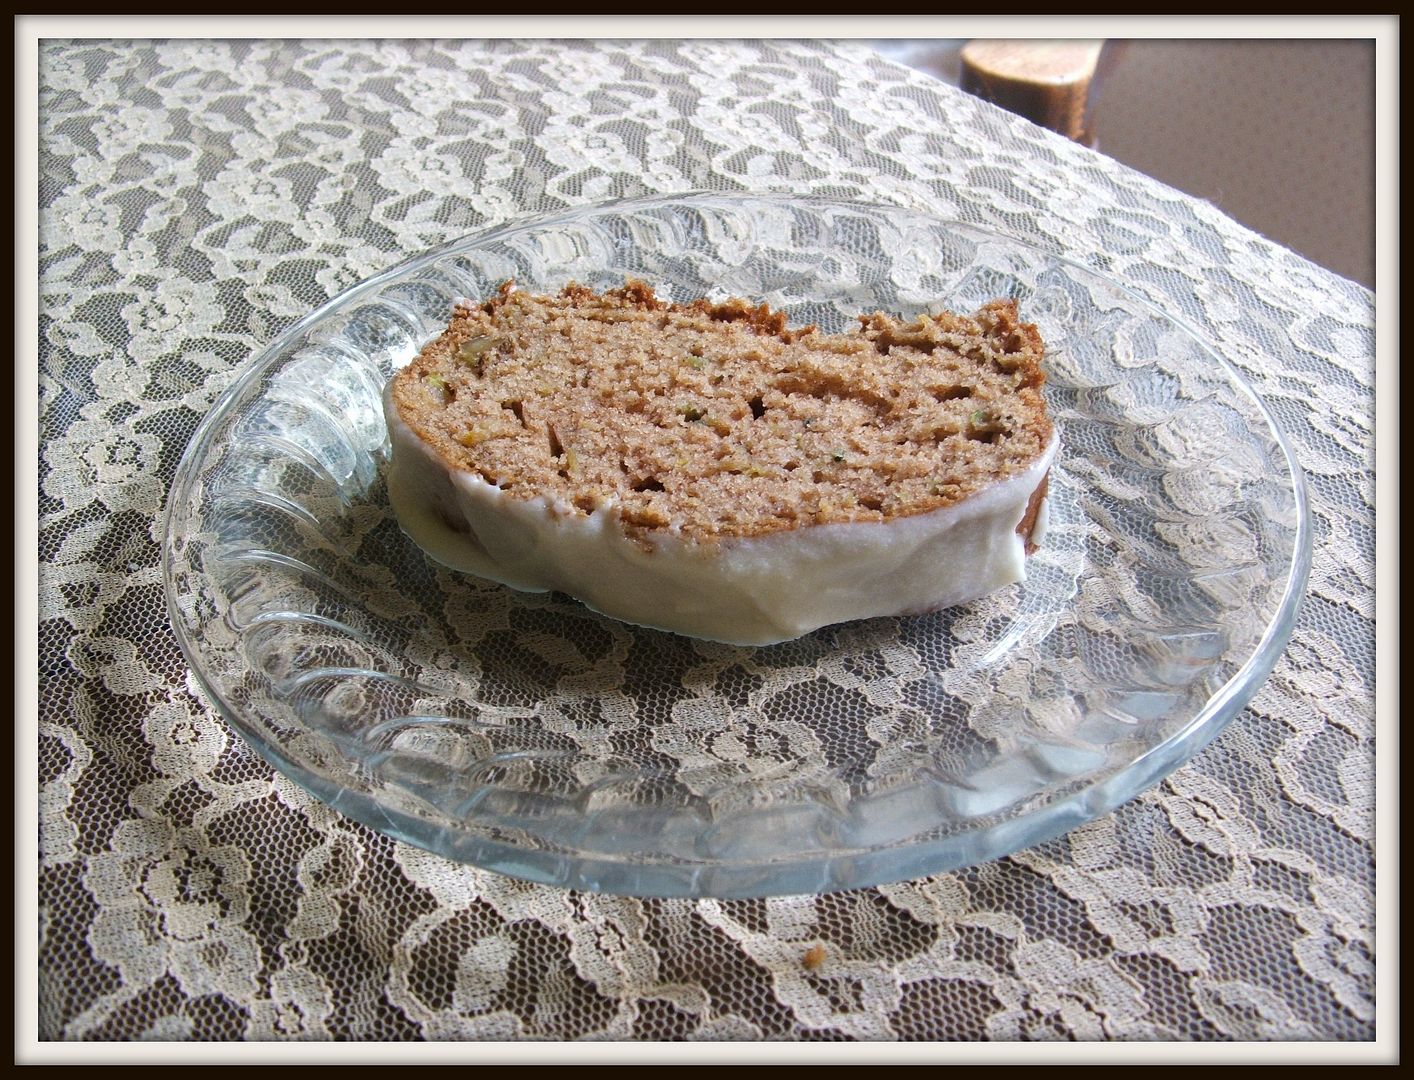 Applesauce Zucchini Bread by Angie Ouellette-Tower for godsgrowinggarden.com photo 009_zps5c0af953.jpg